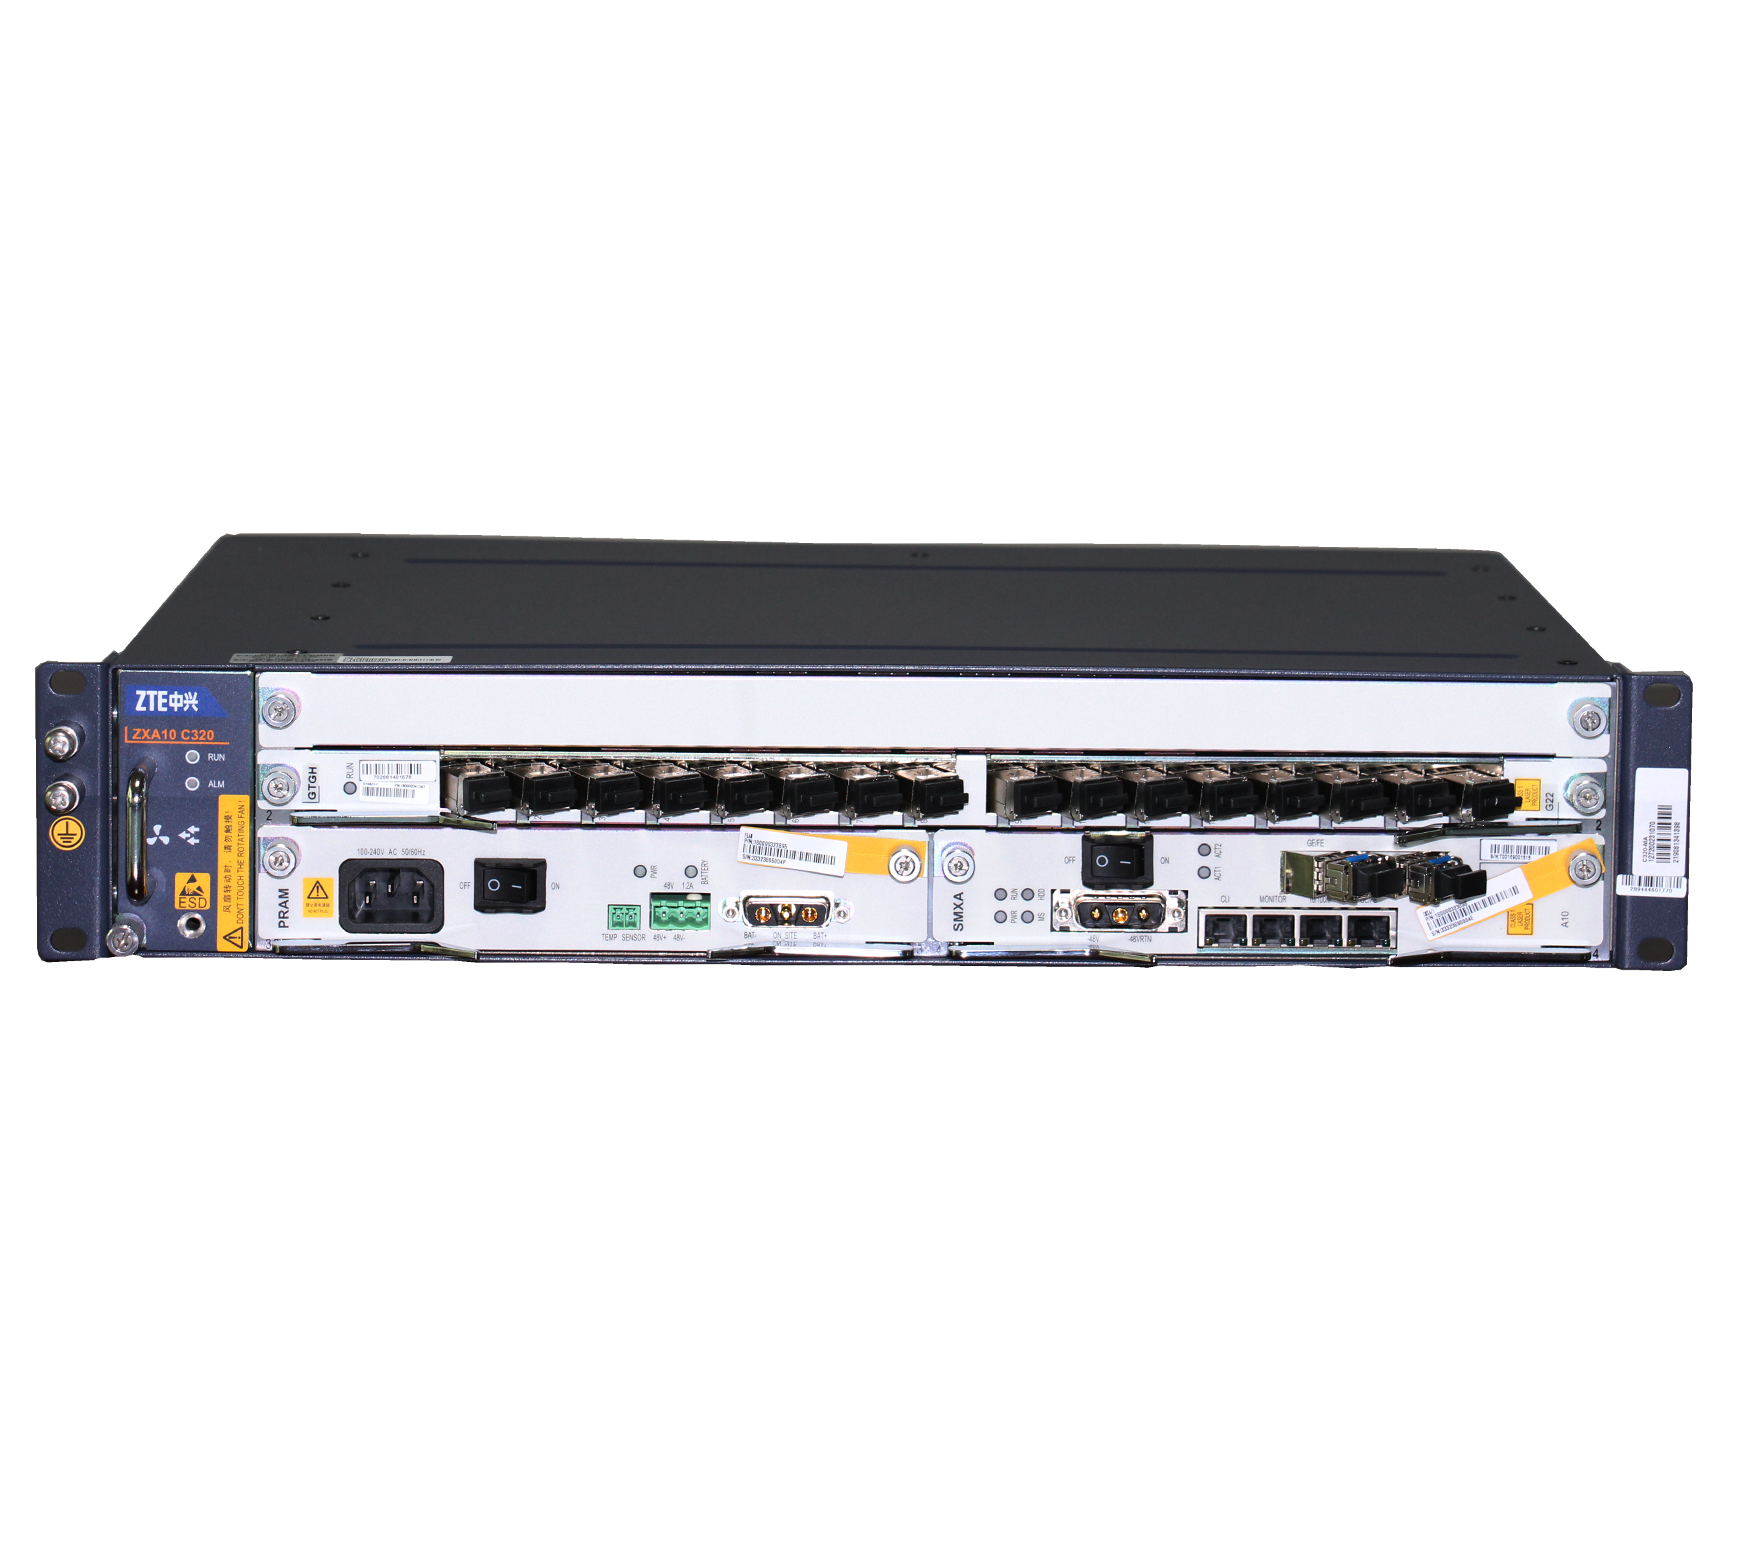 Hot Selling for An5516-04 - ZTE C320 Original New Mini 8 ports 16 ports 32 ports AC DC Power GPON OLT – HUANET